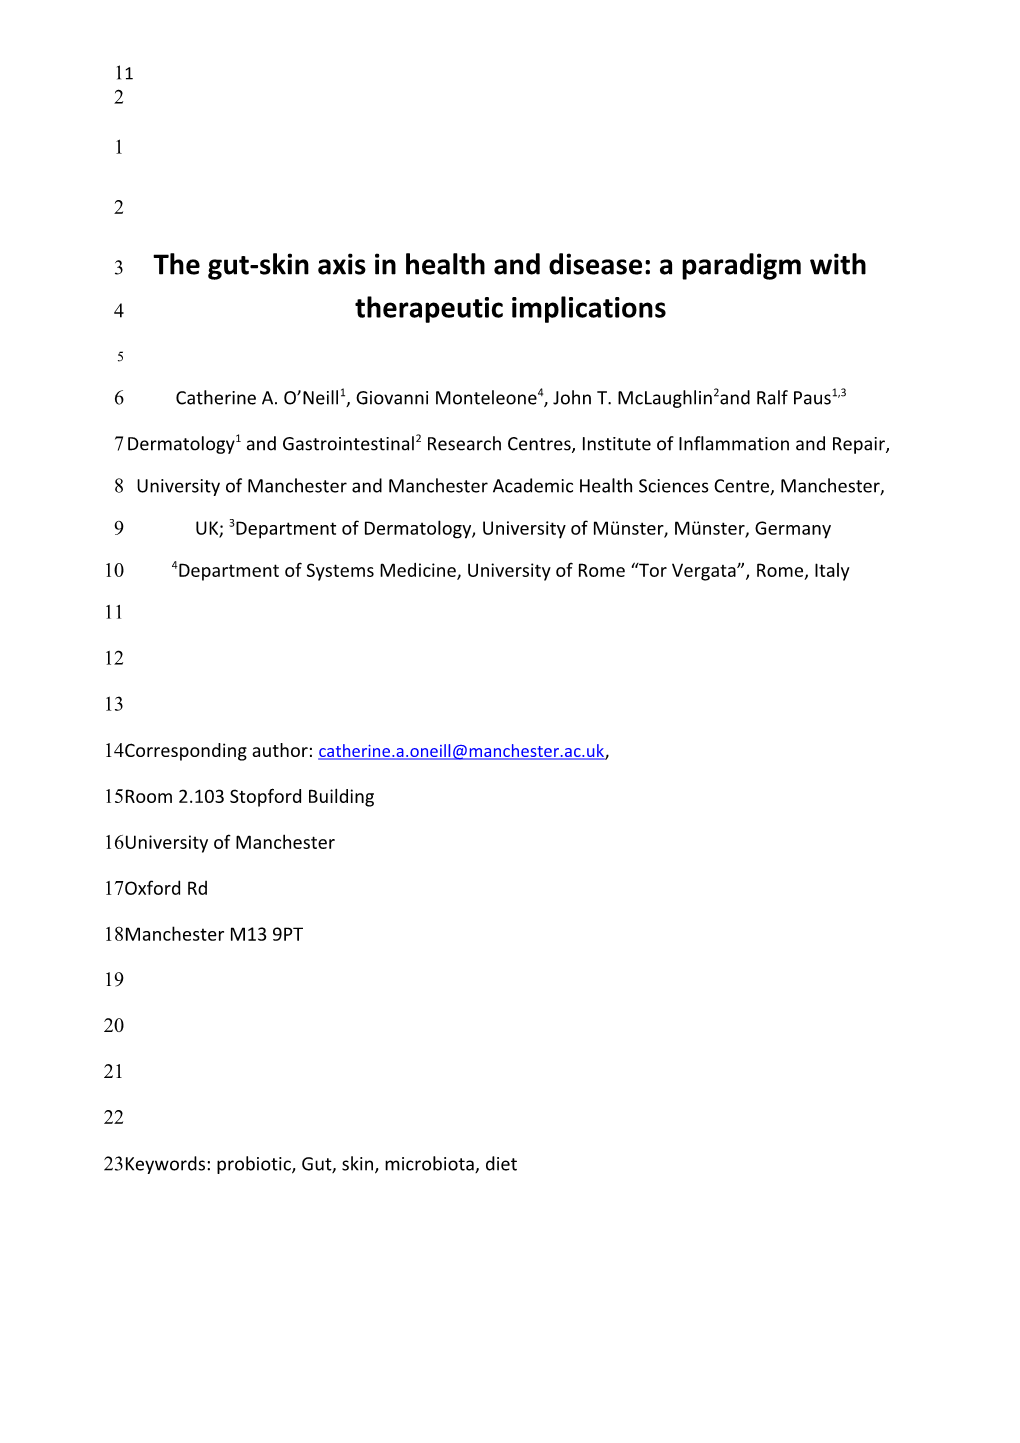 The Gut-Skin Axis in Health and Disease: a Paradigm with Therapeutic Implications